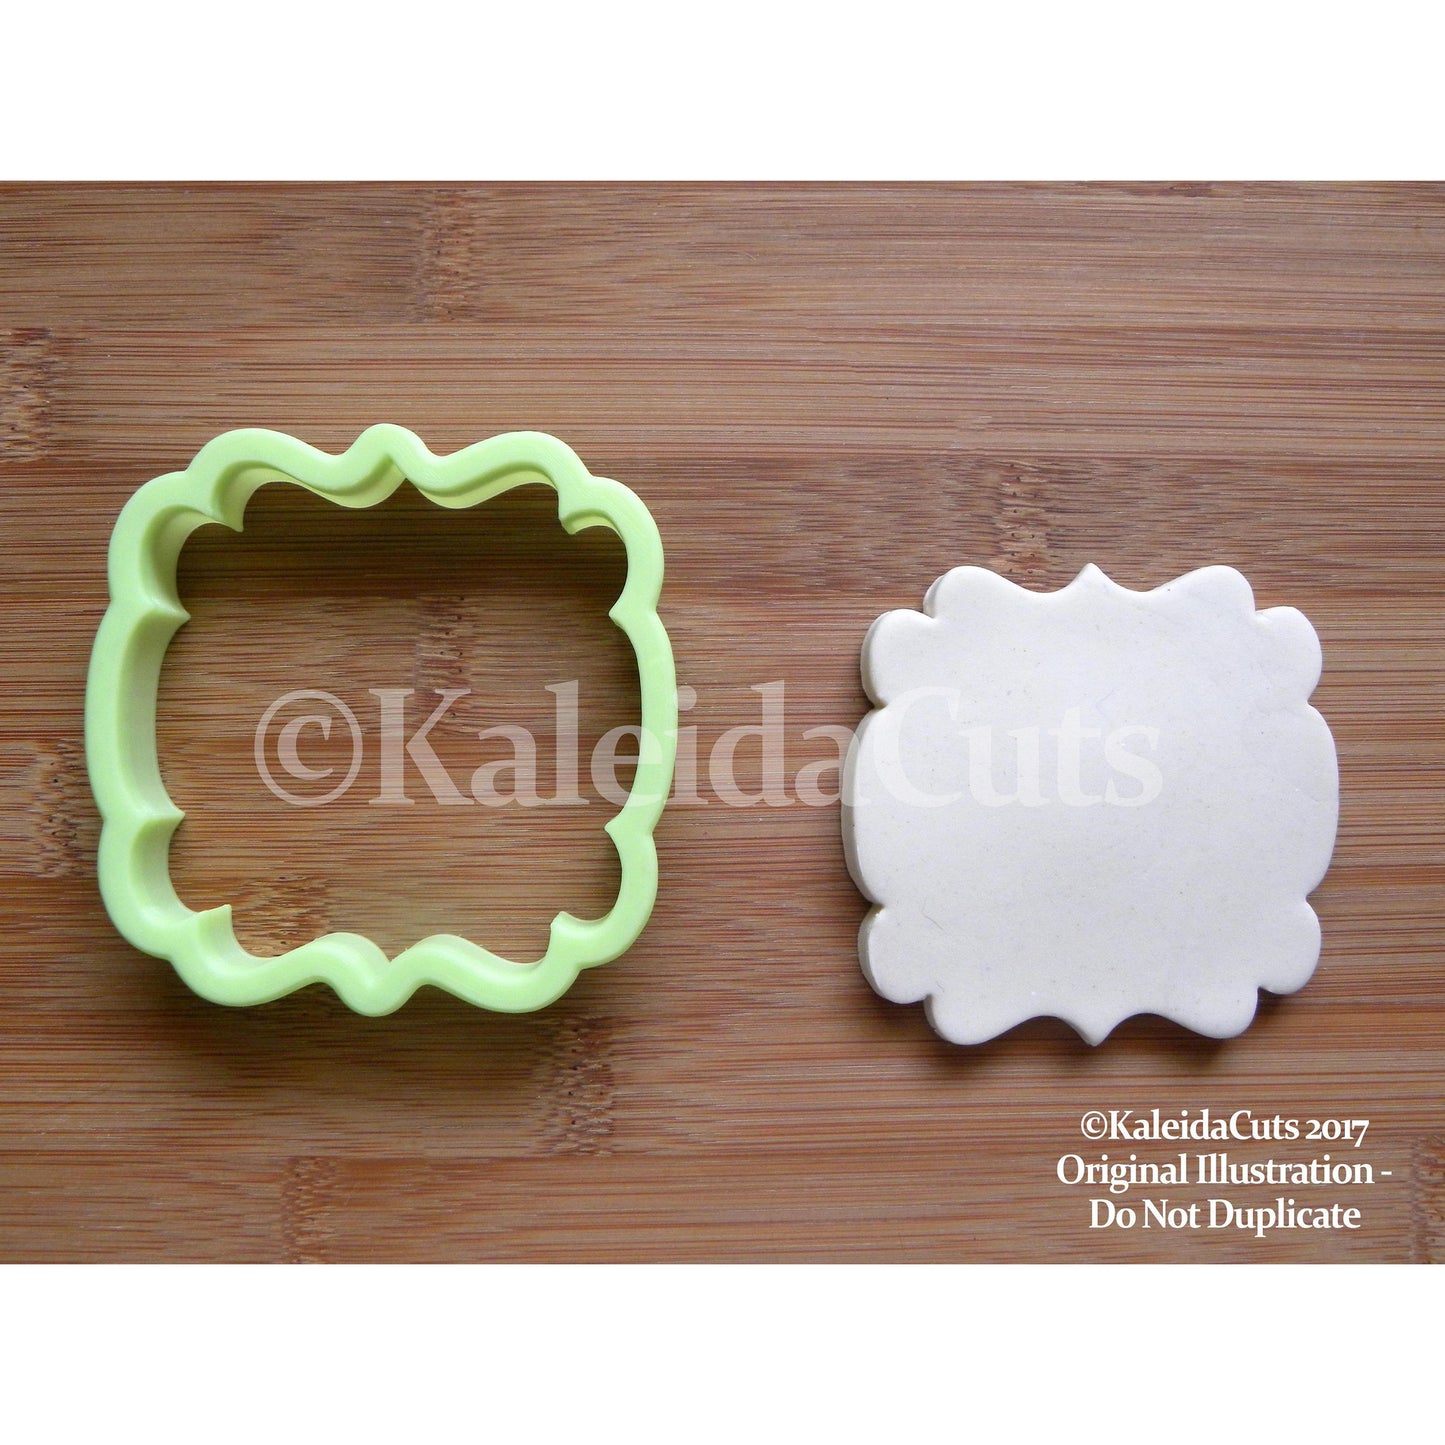 Charlotte Squared Plaque Cookie Cutter